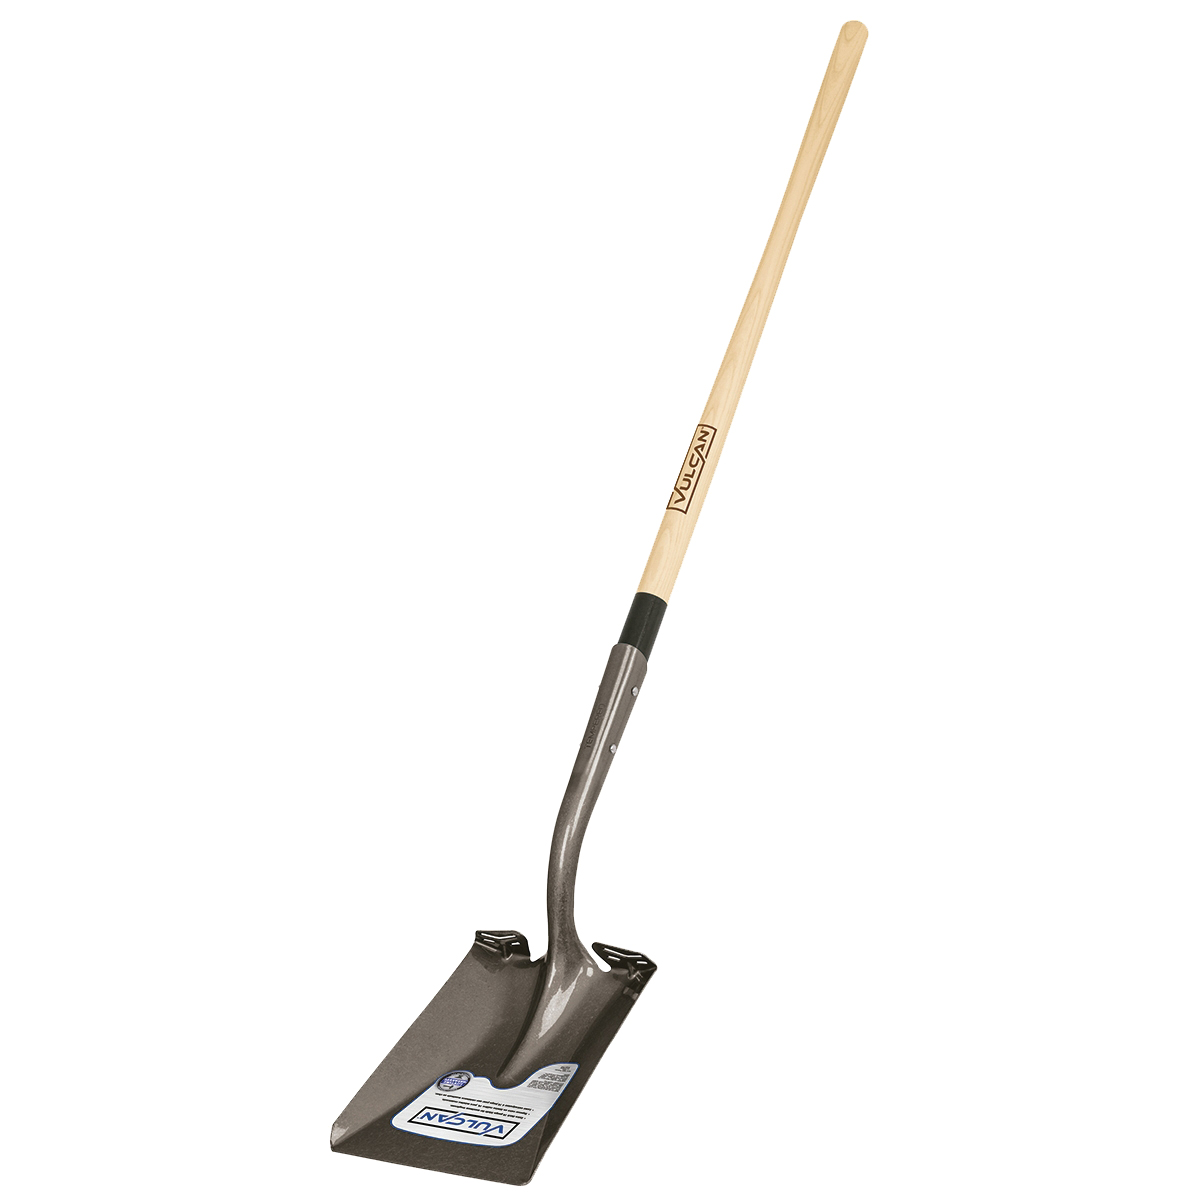 34462 Square Point Shovel, 14 ga Gauge, Wood Handle, Double Riveted Handle, 48 in L Handle